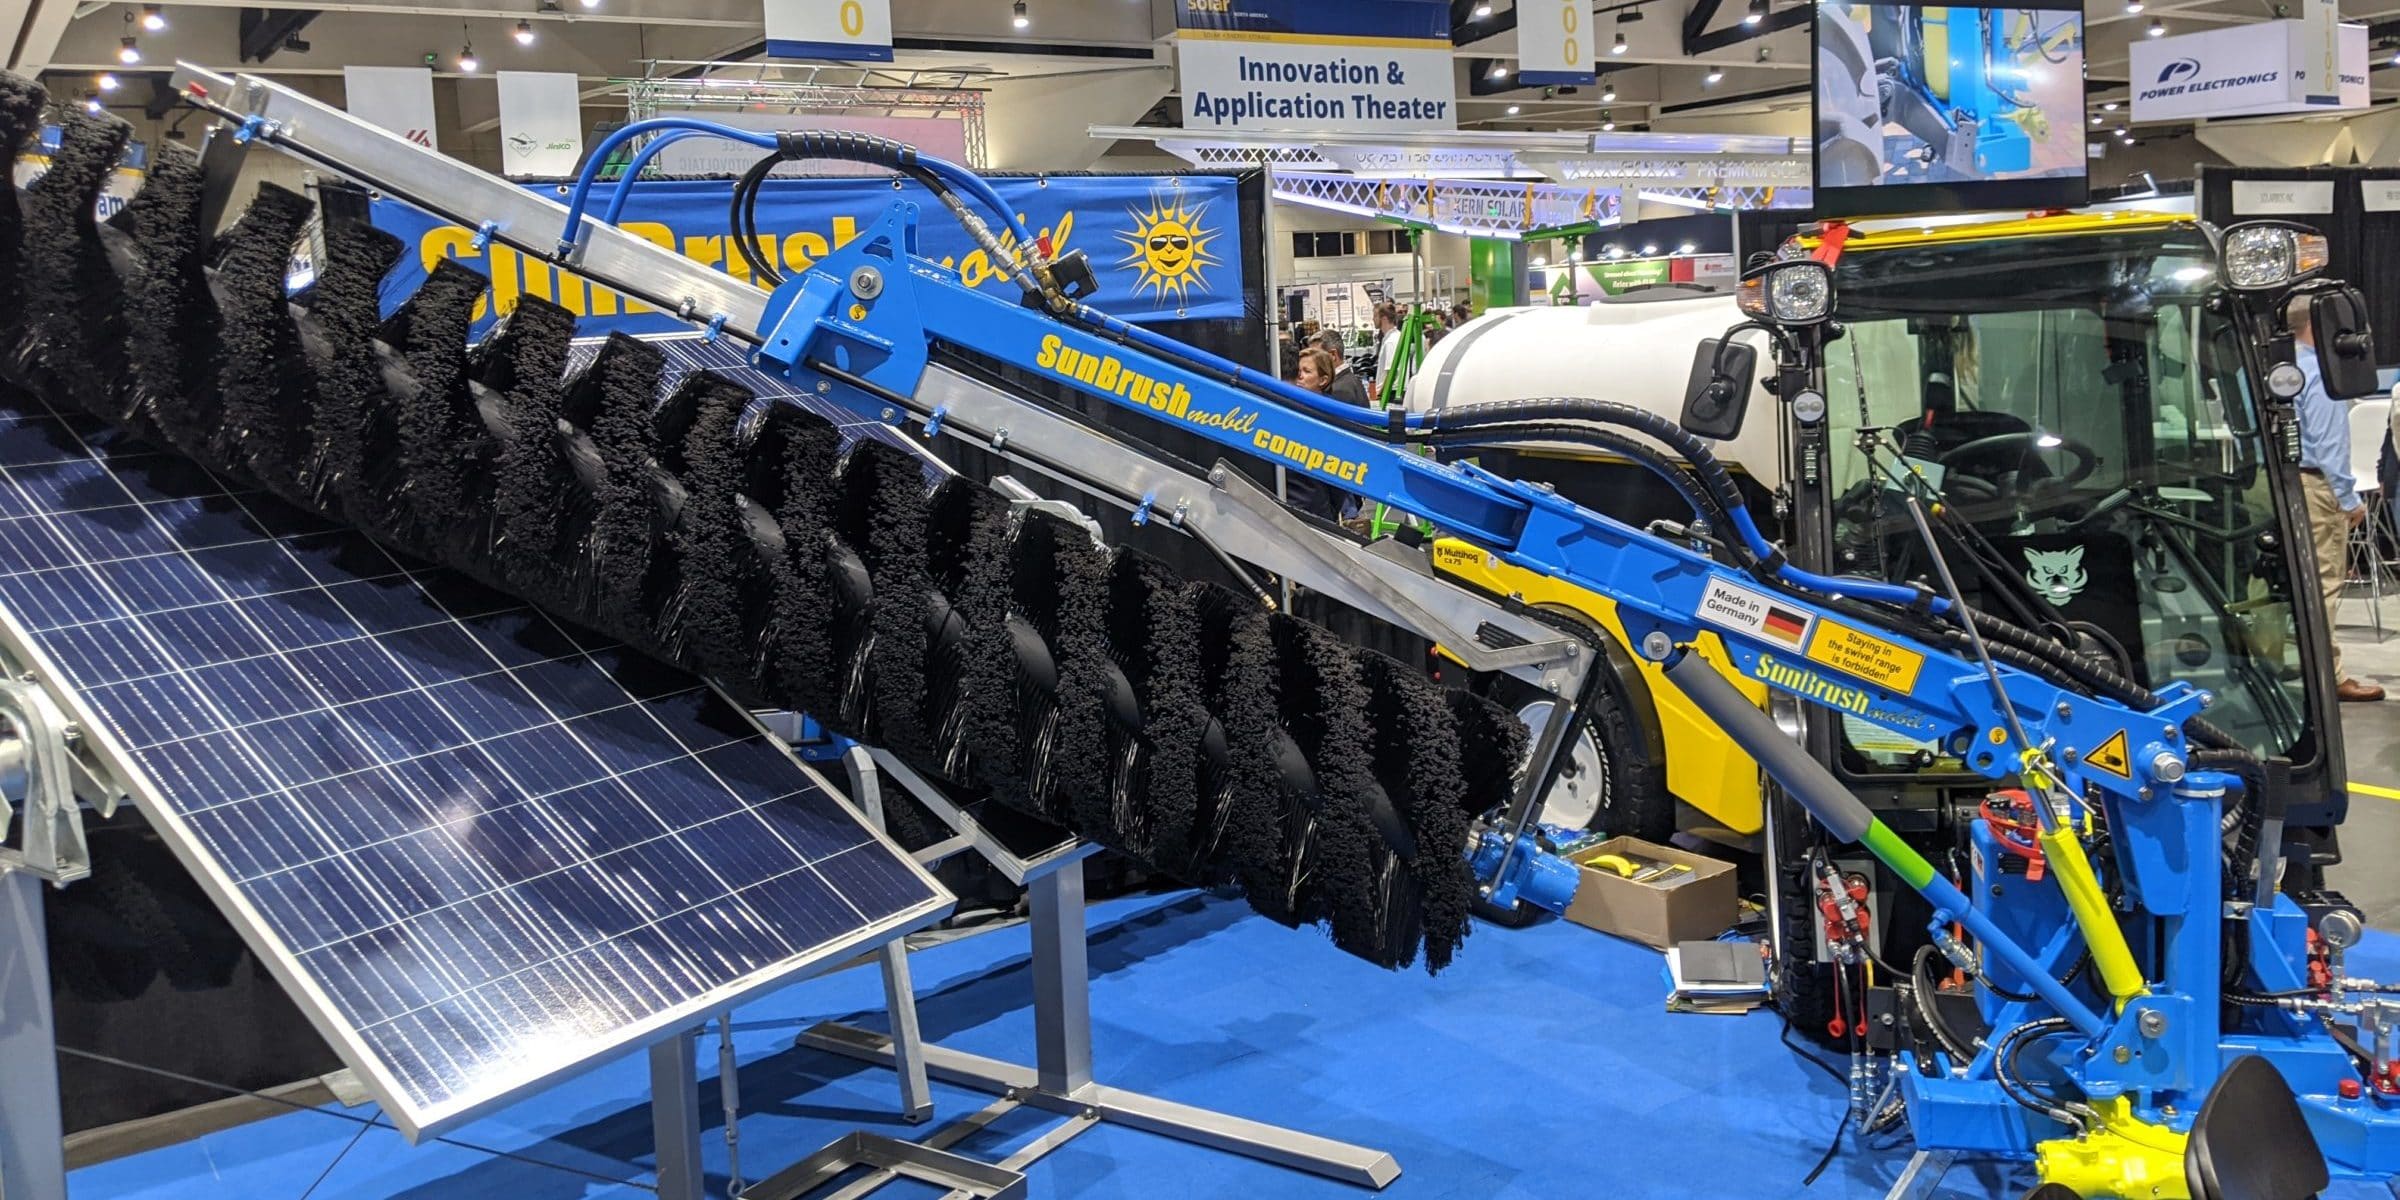 Let the solar games begin — more innovation on the Intersolar show